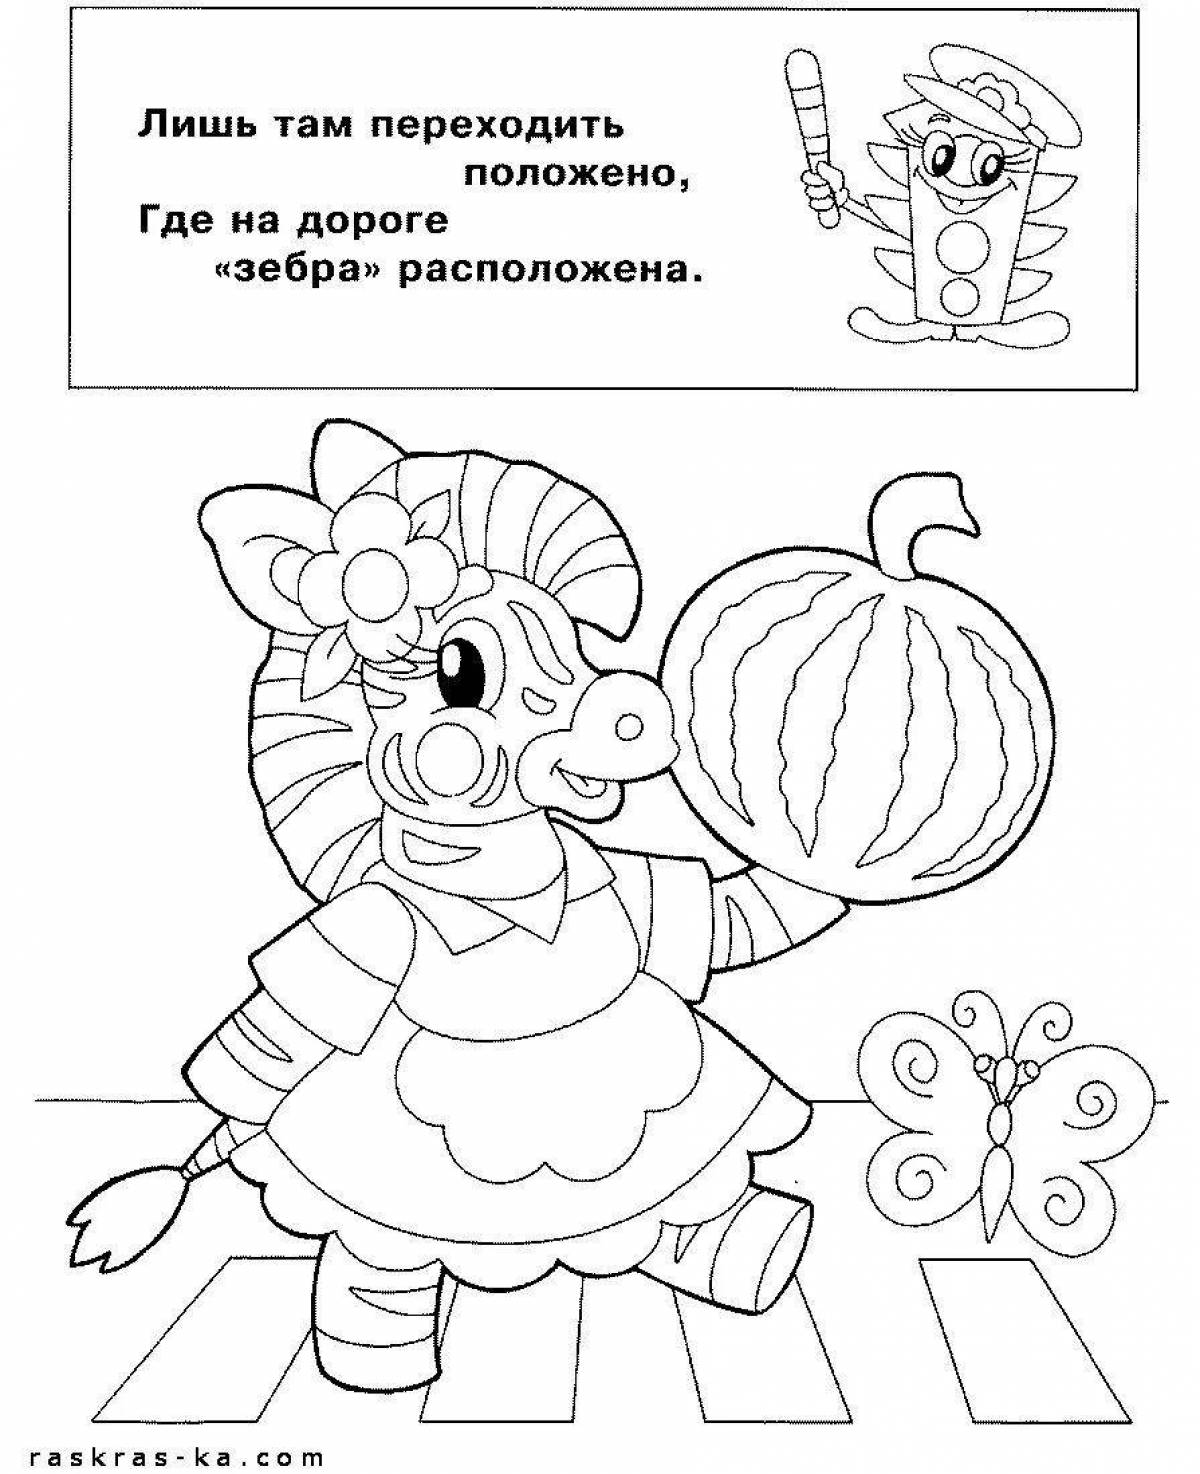 Playful traffic rules coloring page for 4-5 year olds